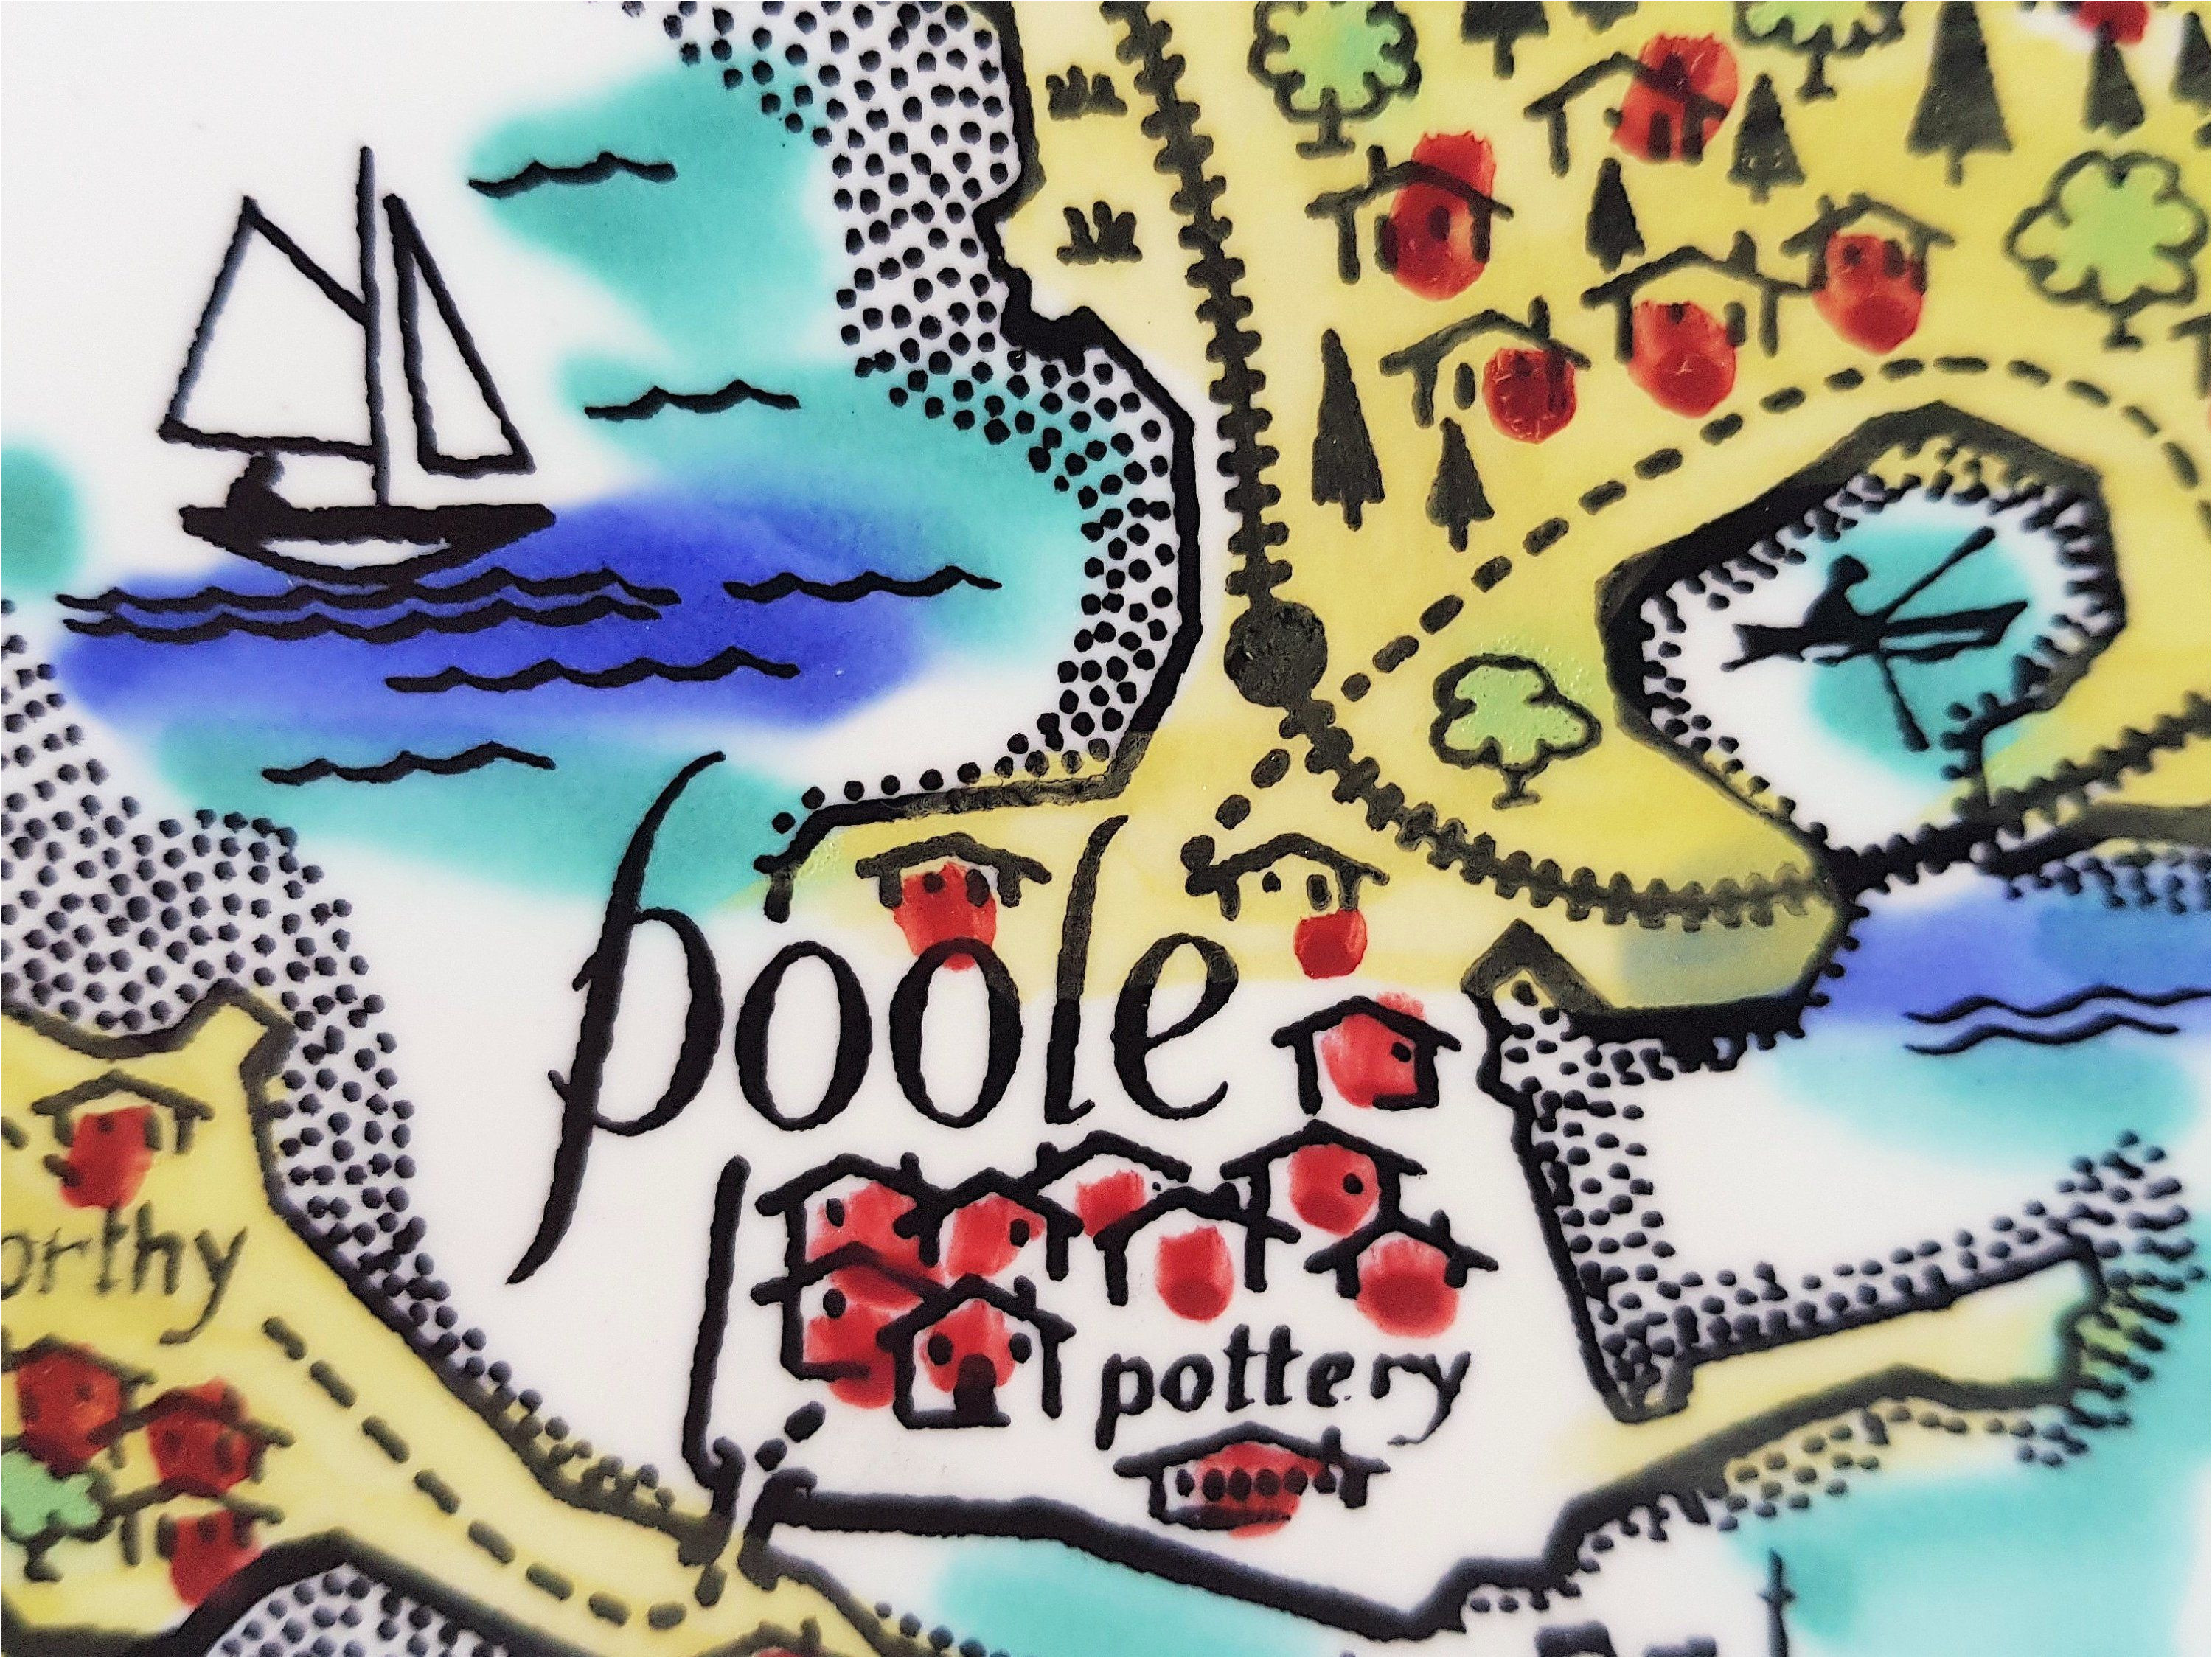 perfect poole pottery plate hand painted map of poole